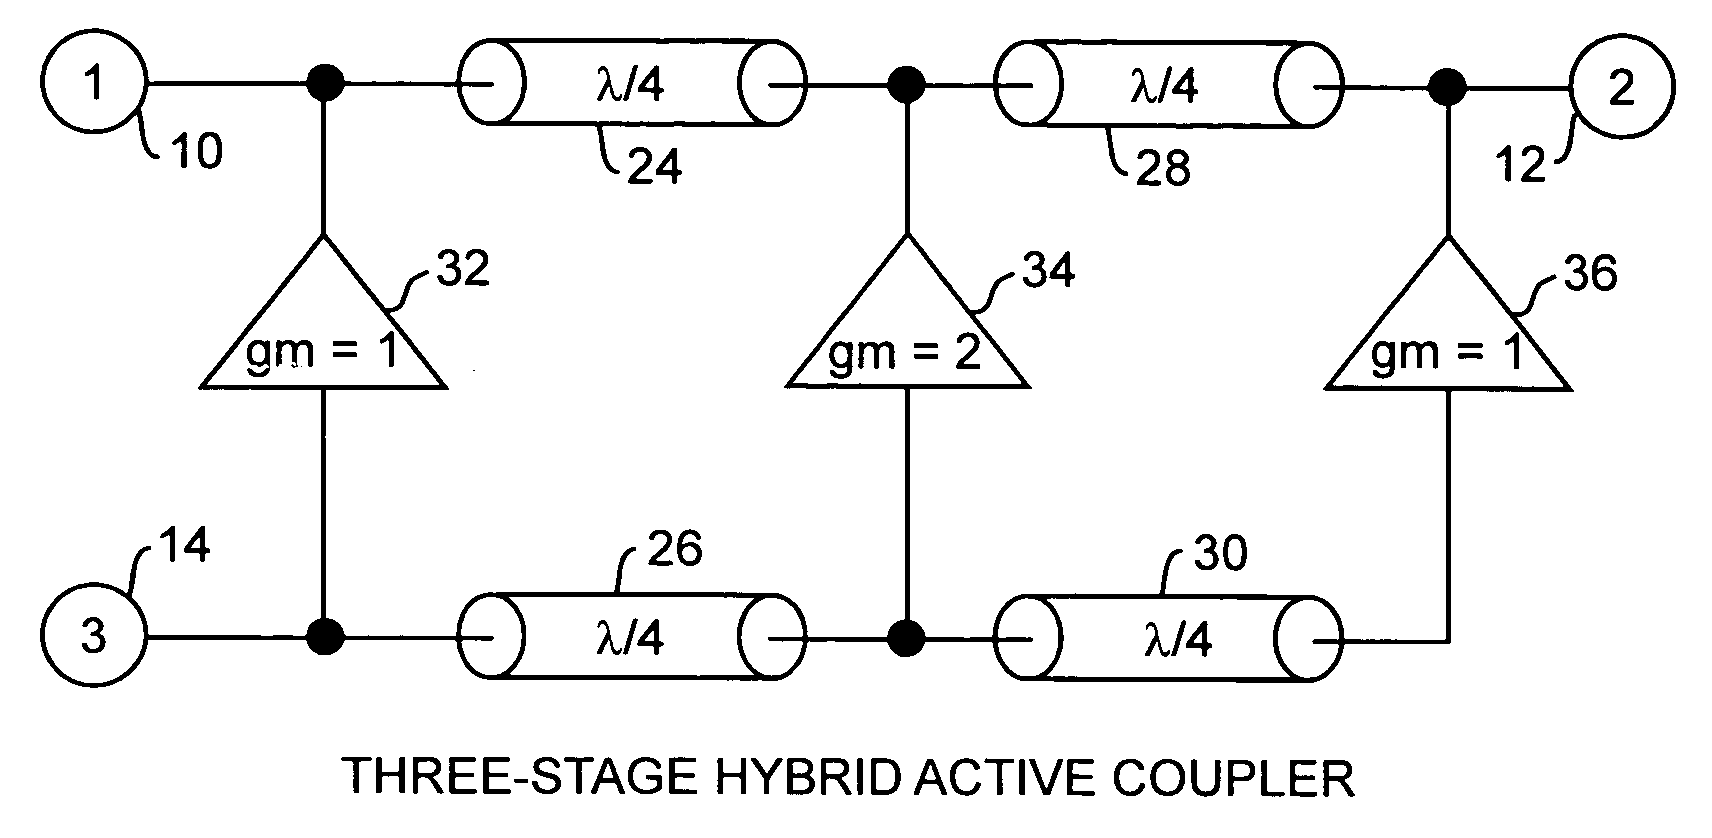 Hybrid active combiner and circulator